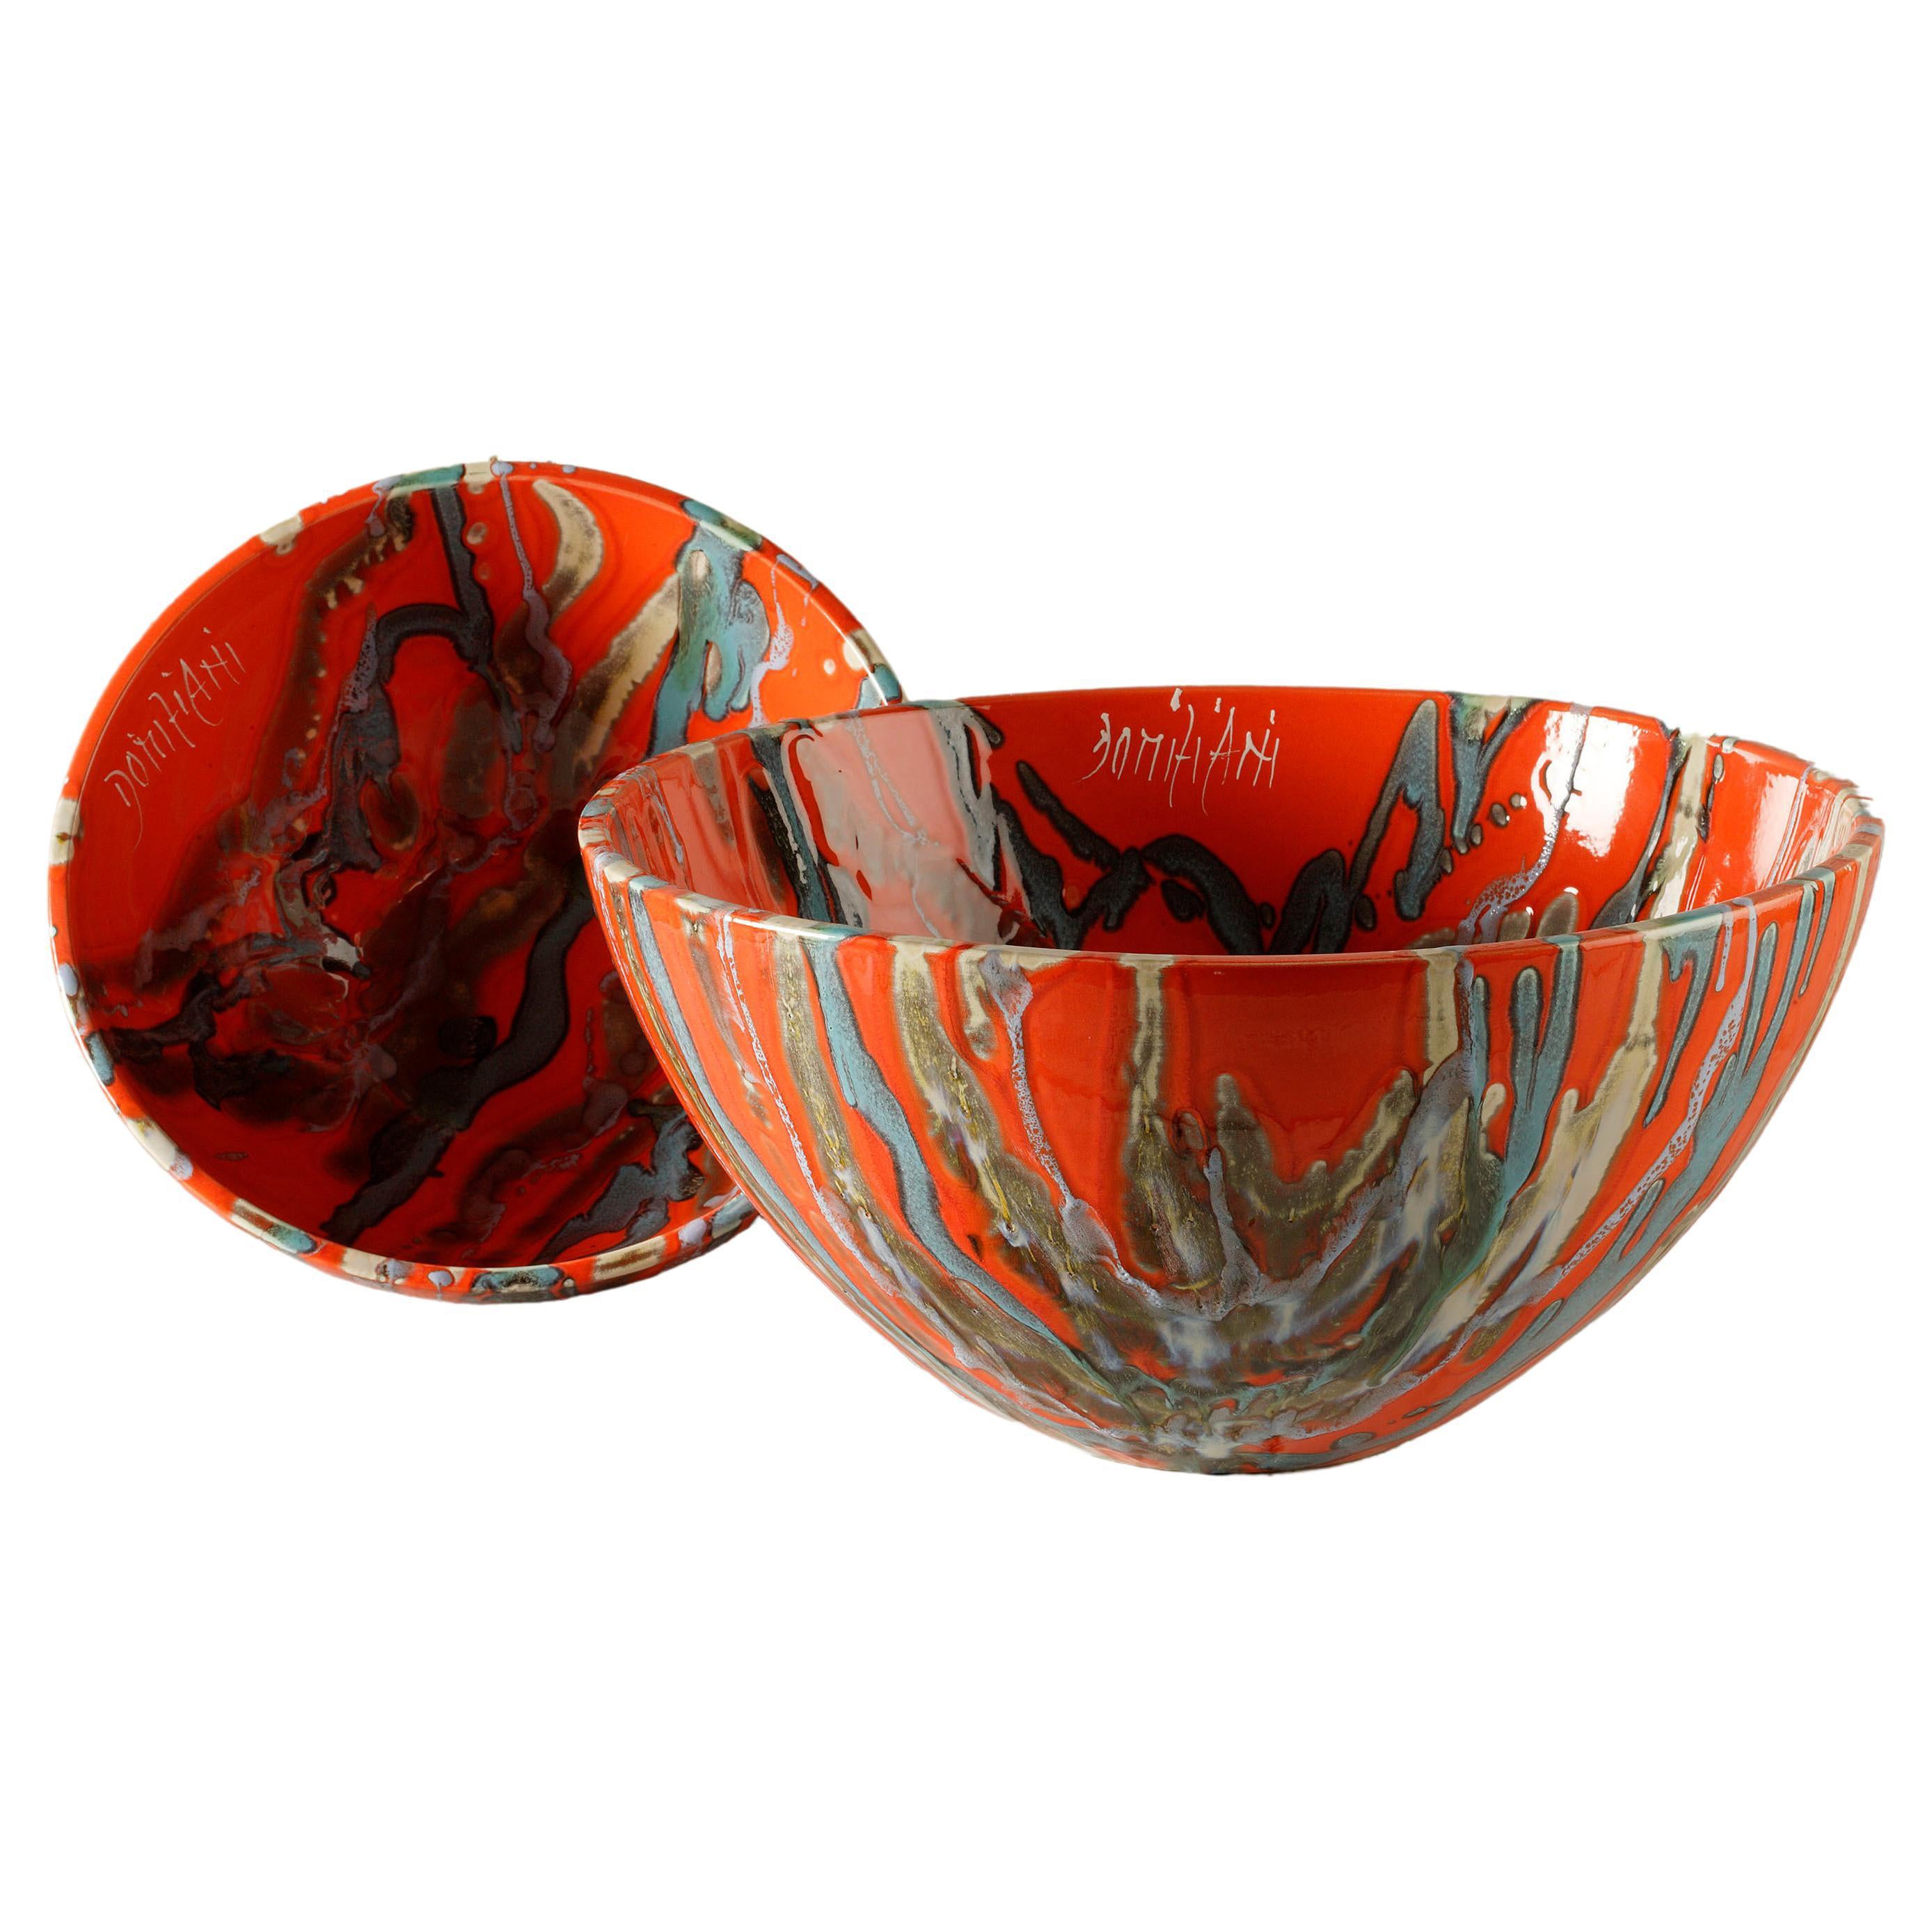 Ceramic Bowl Handmade in Italy 2021, Choose Your Pattern